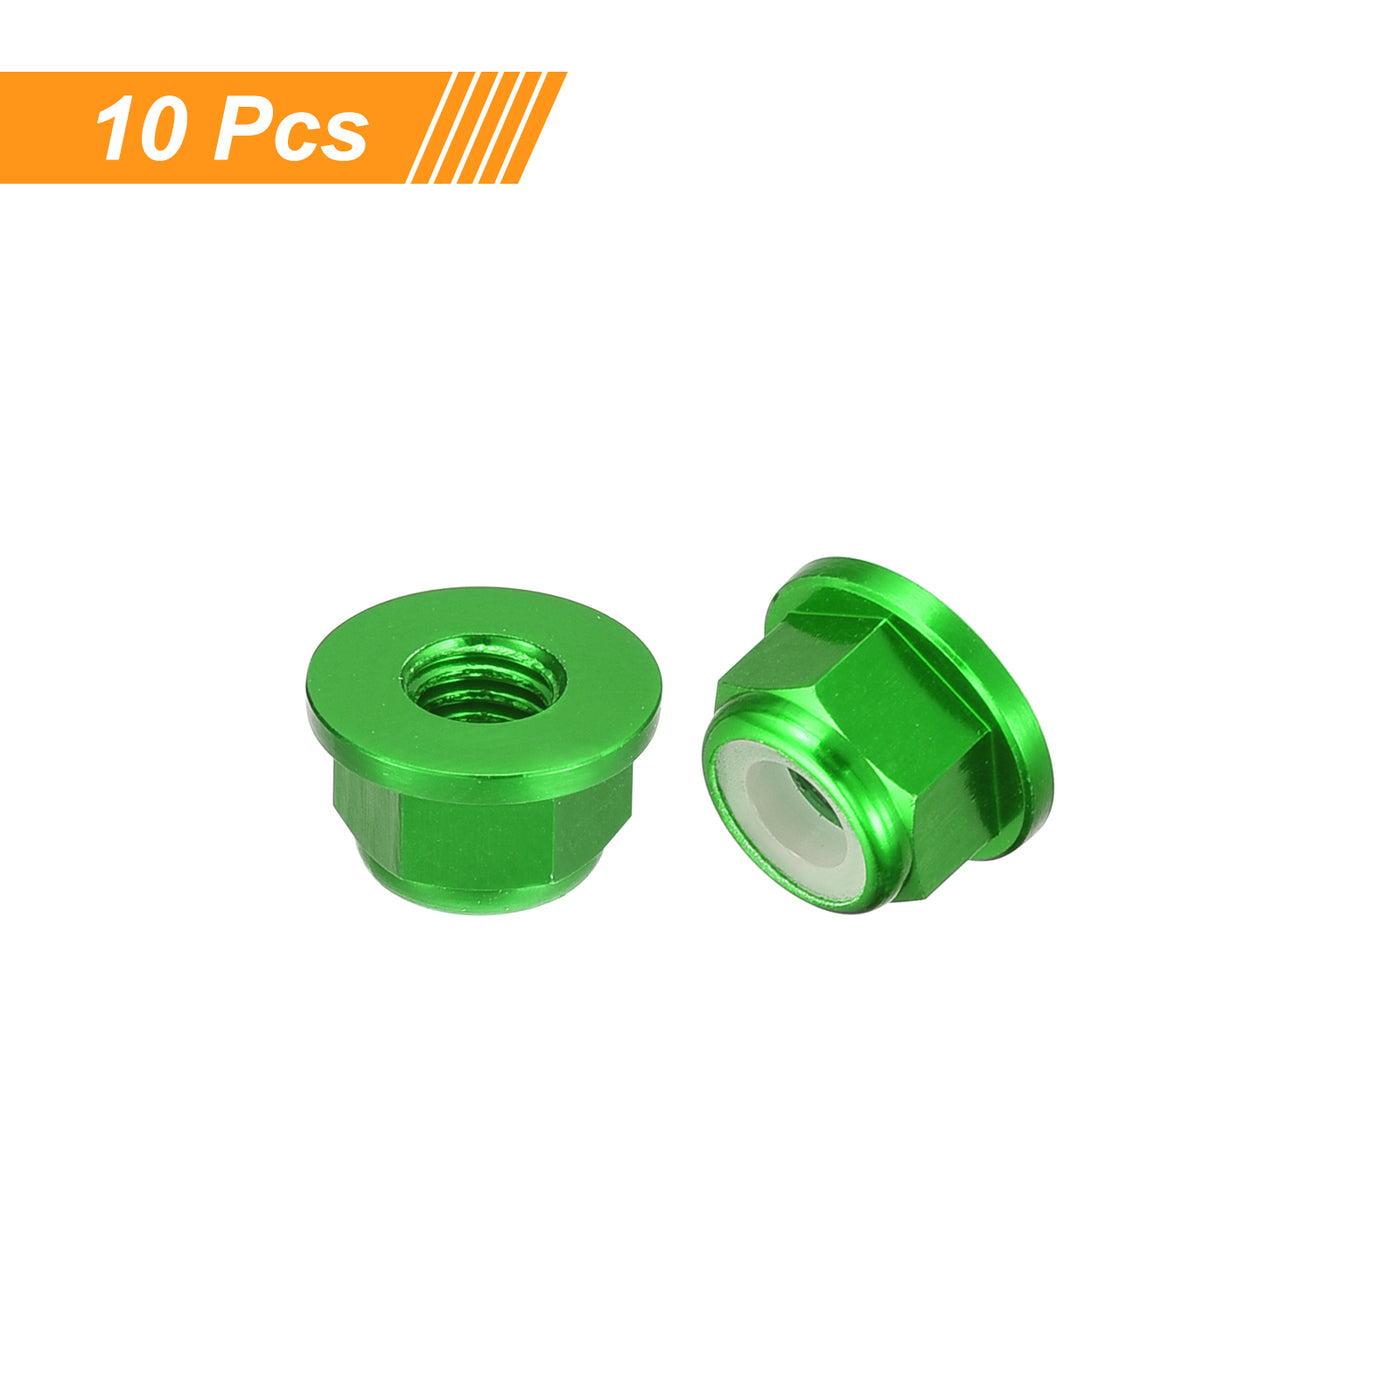 uxcell Uxcell Nylon Insert Hex Lock Nuts, 10pcs - M4 x 0.7mm Aluminum Alloy Self-Locking Nut, Anodizing Flange Lock Nut for Fasteners (Green)